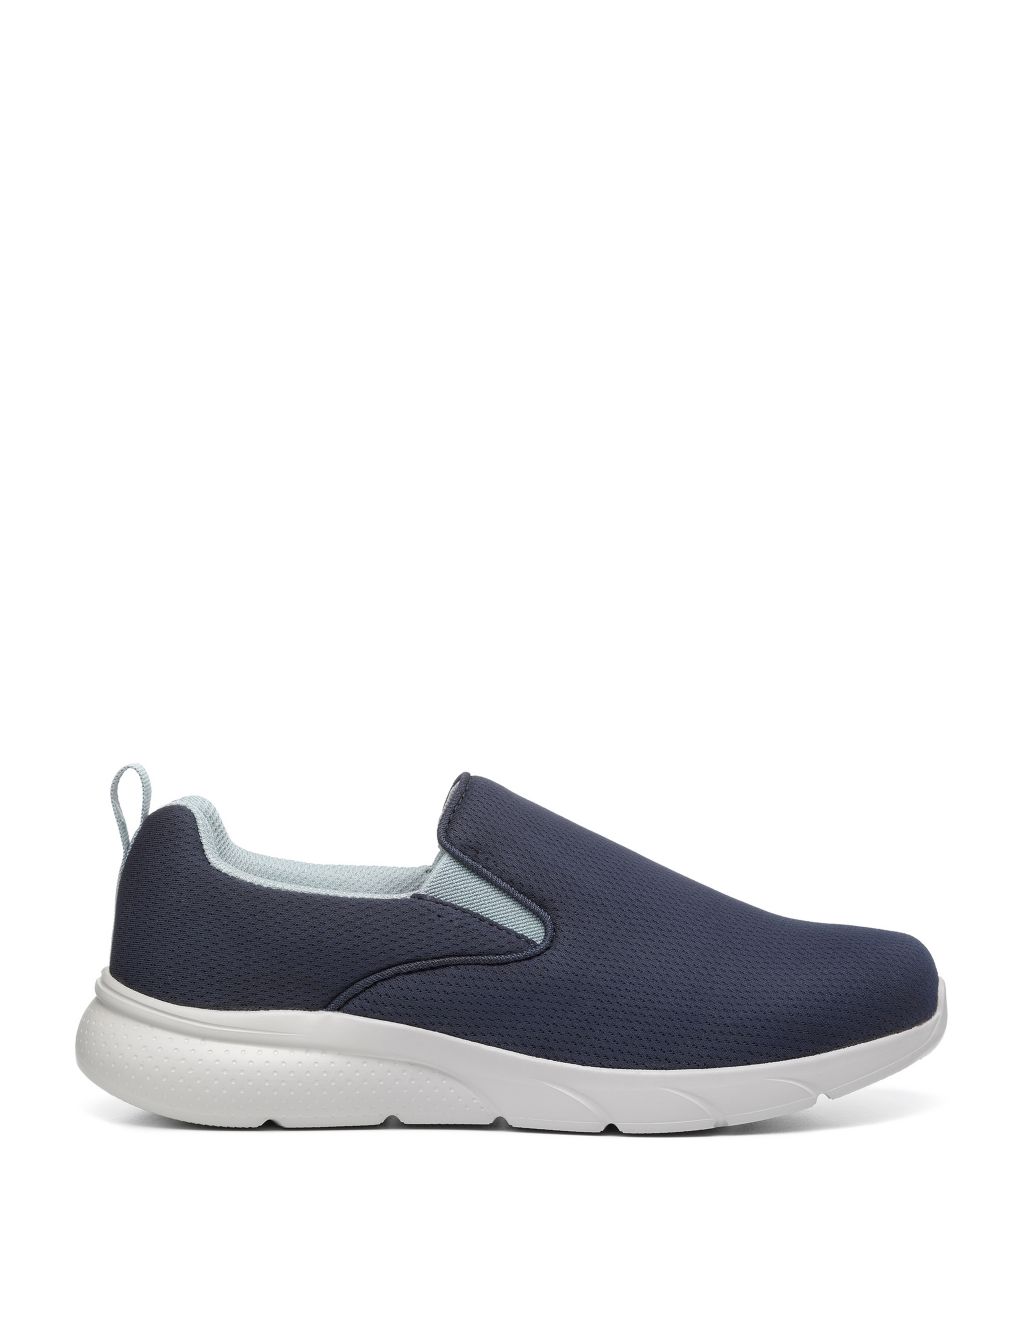 Instinct Knitted Slip On Trainers | Hotter | M&S